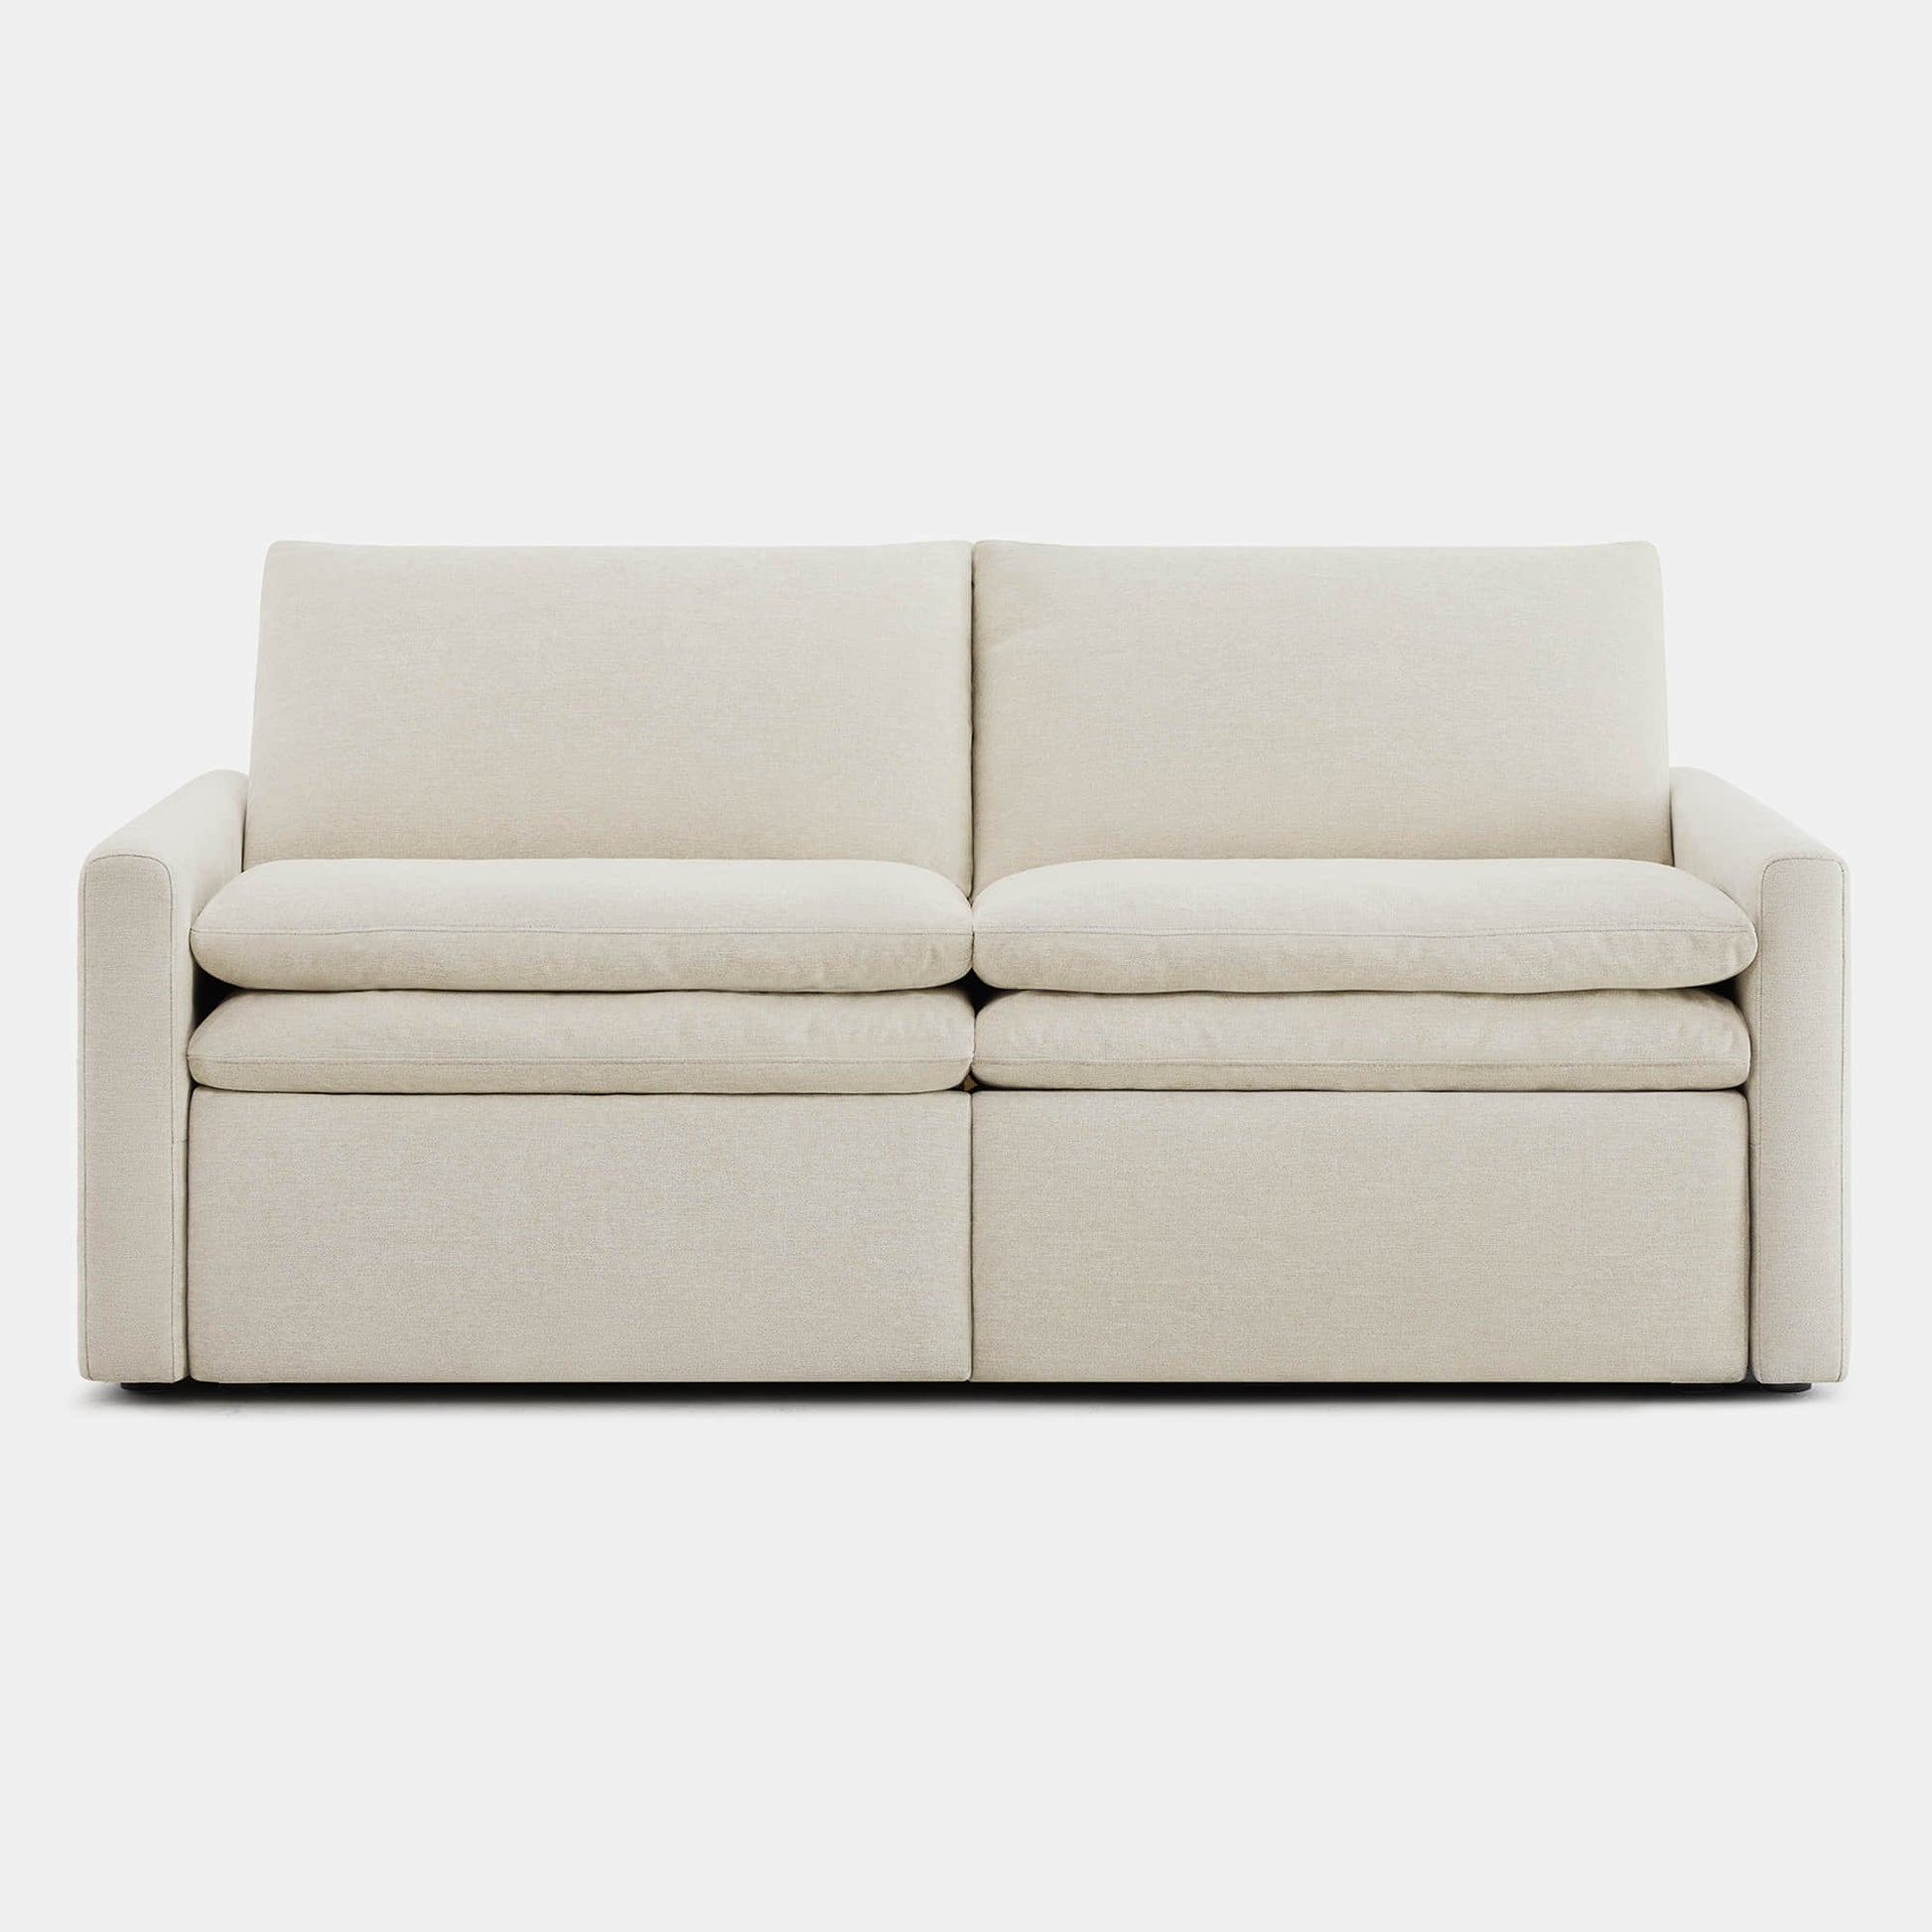 comfortable couches